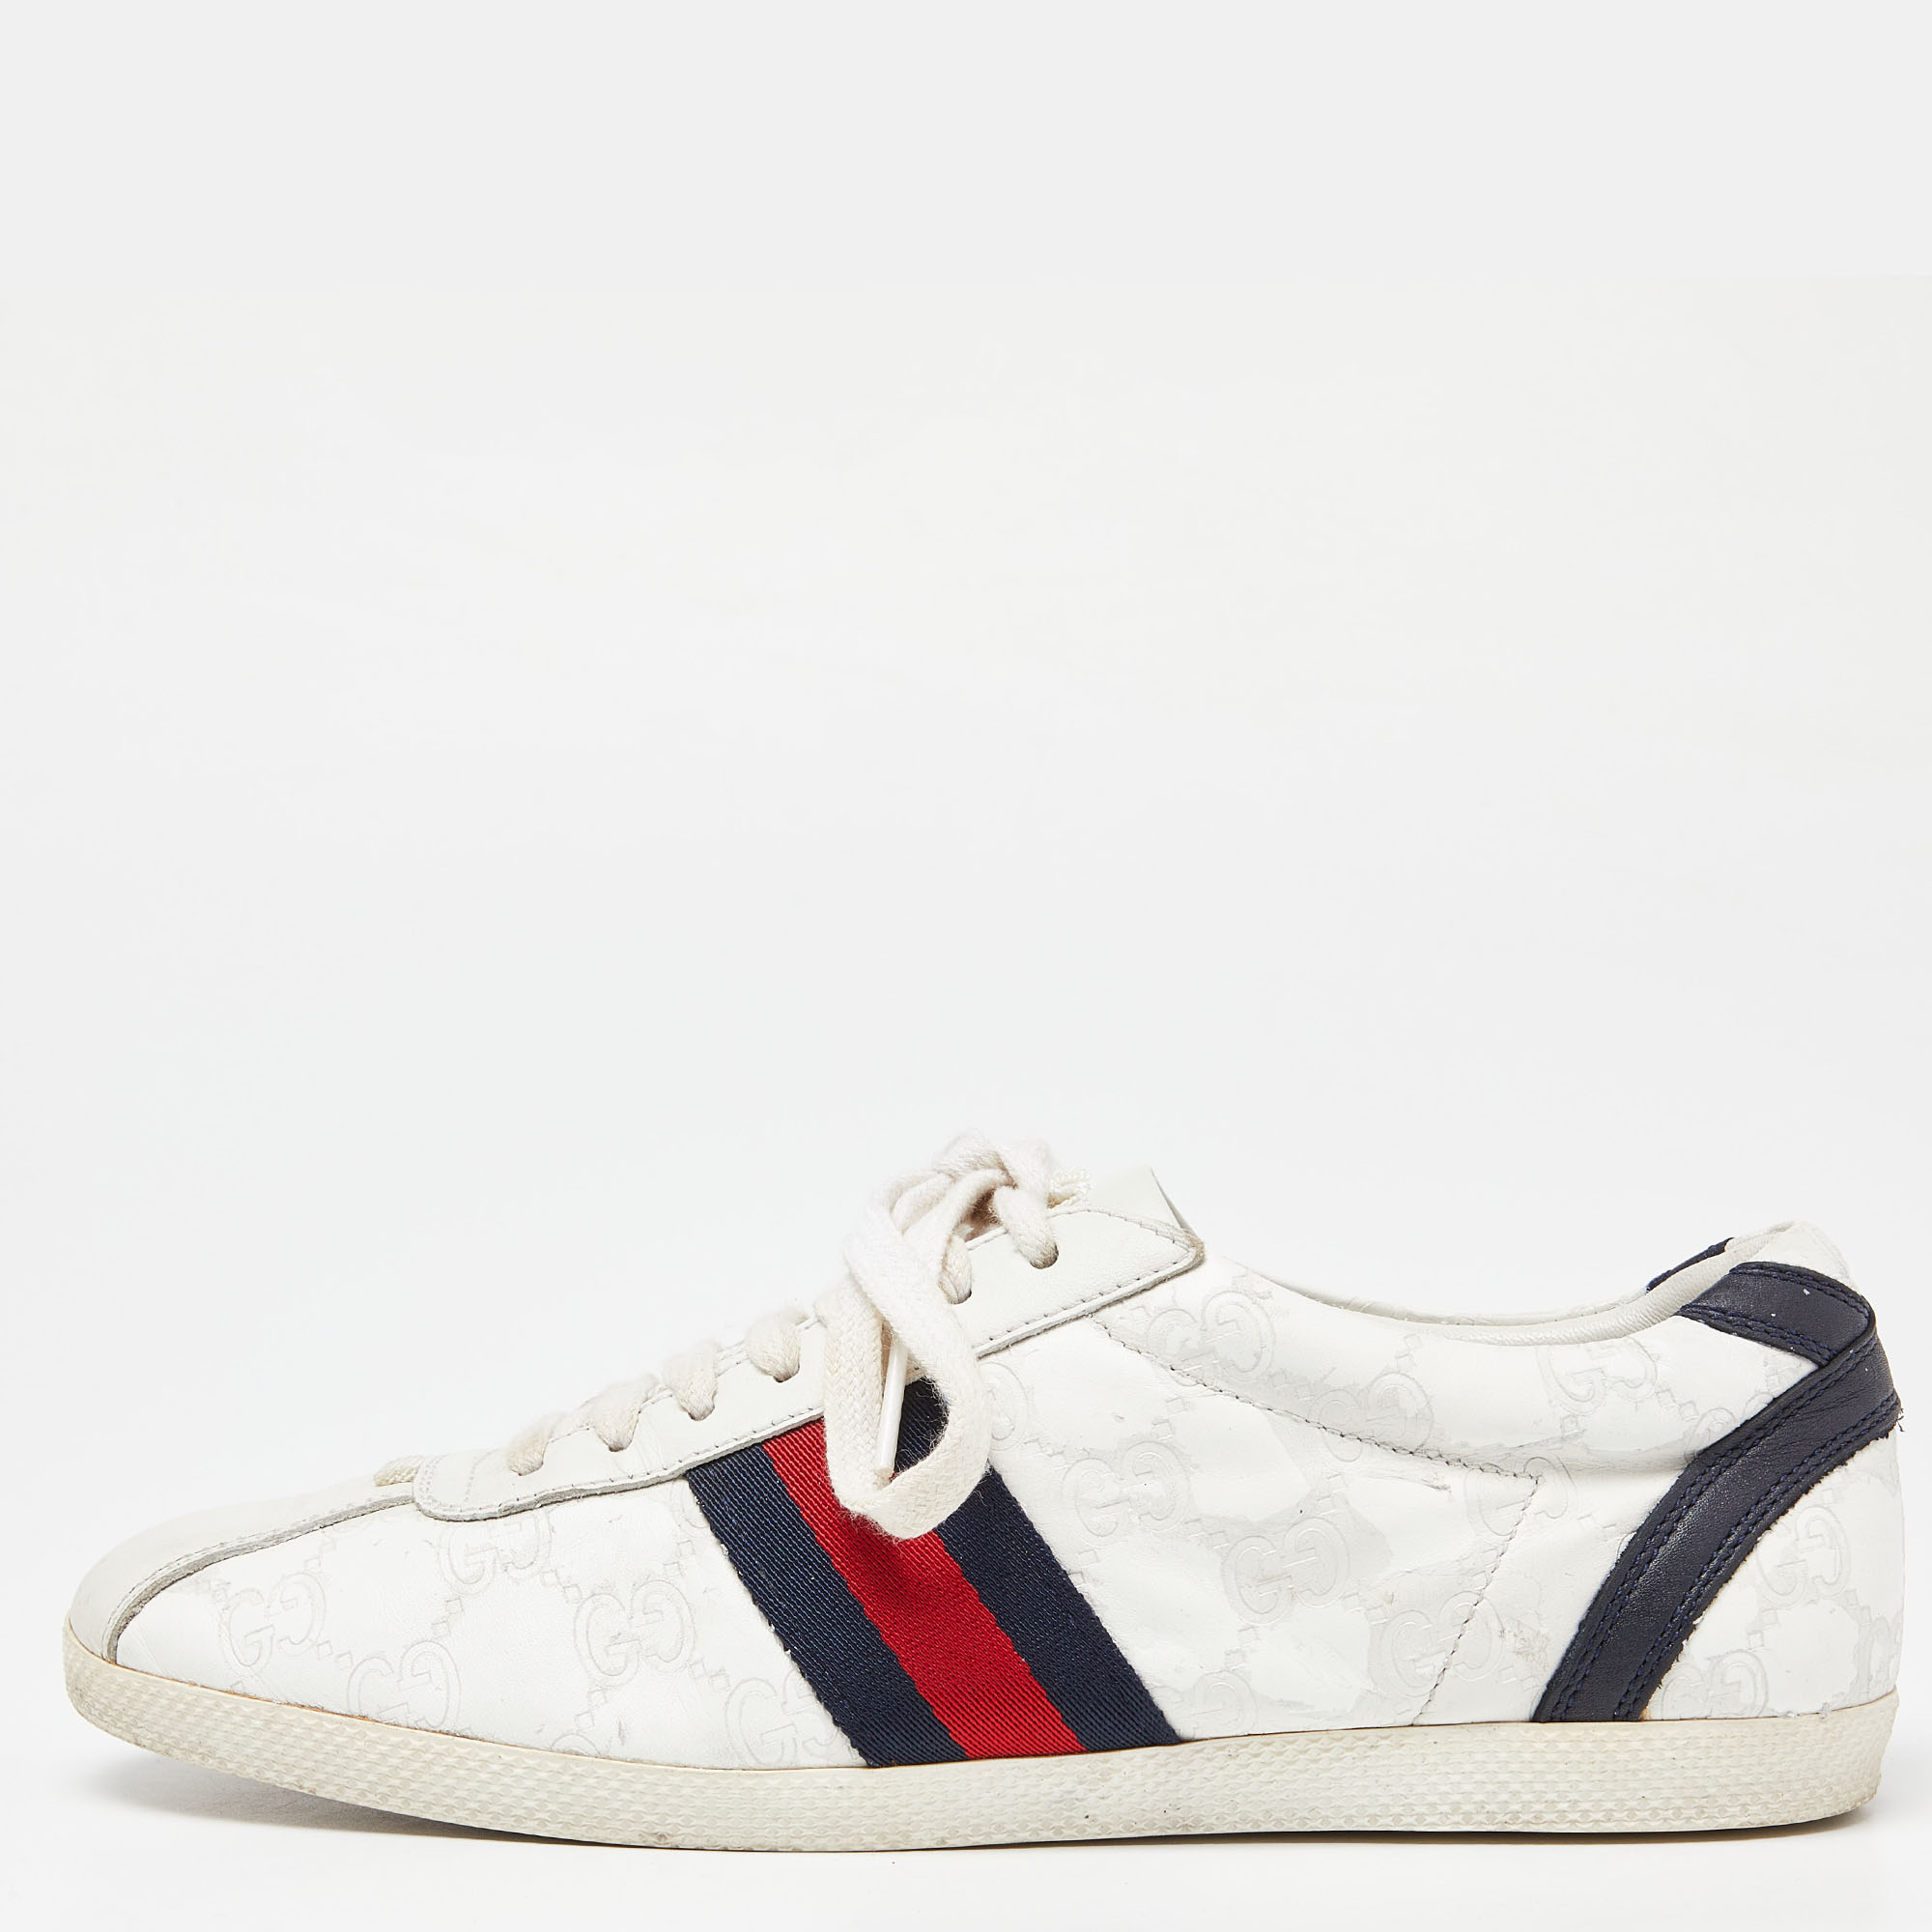 Gucci white guccissima leather web low top sneakers size 37